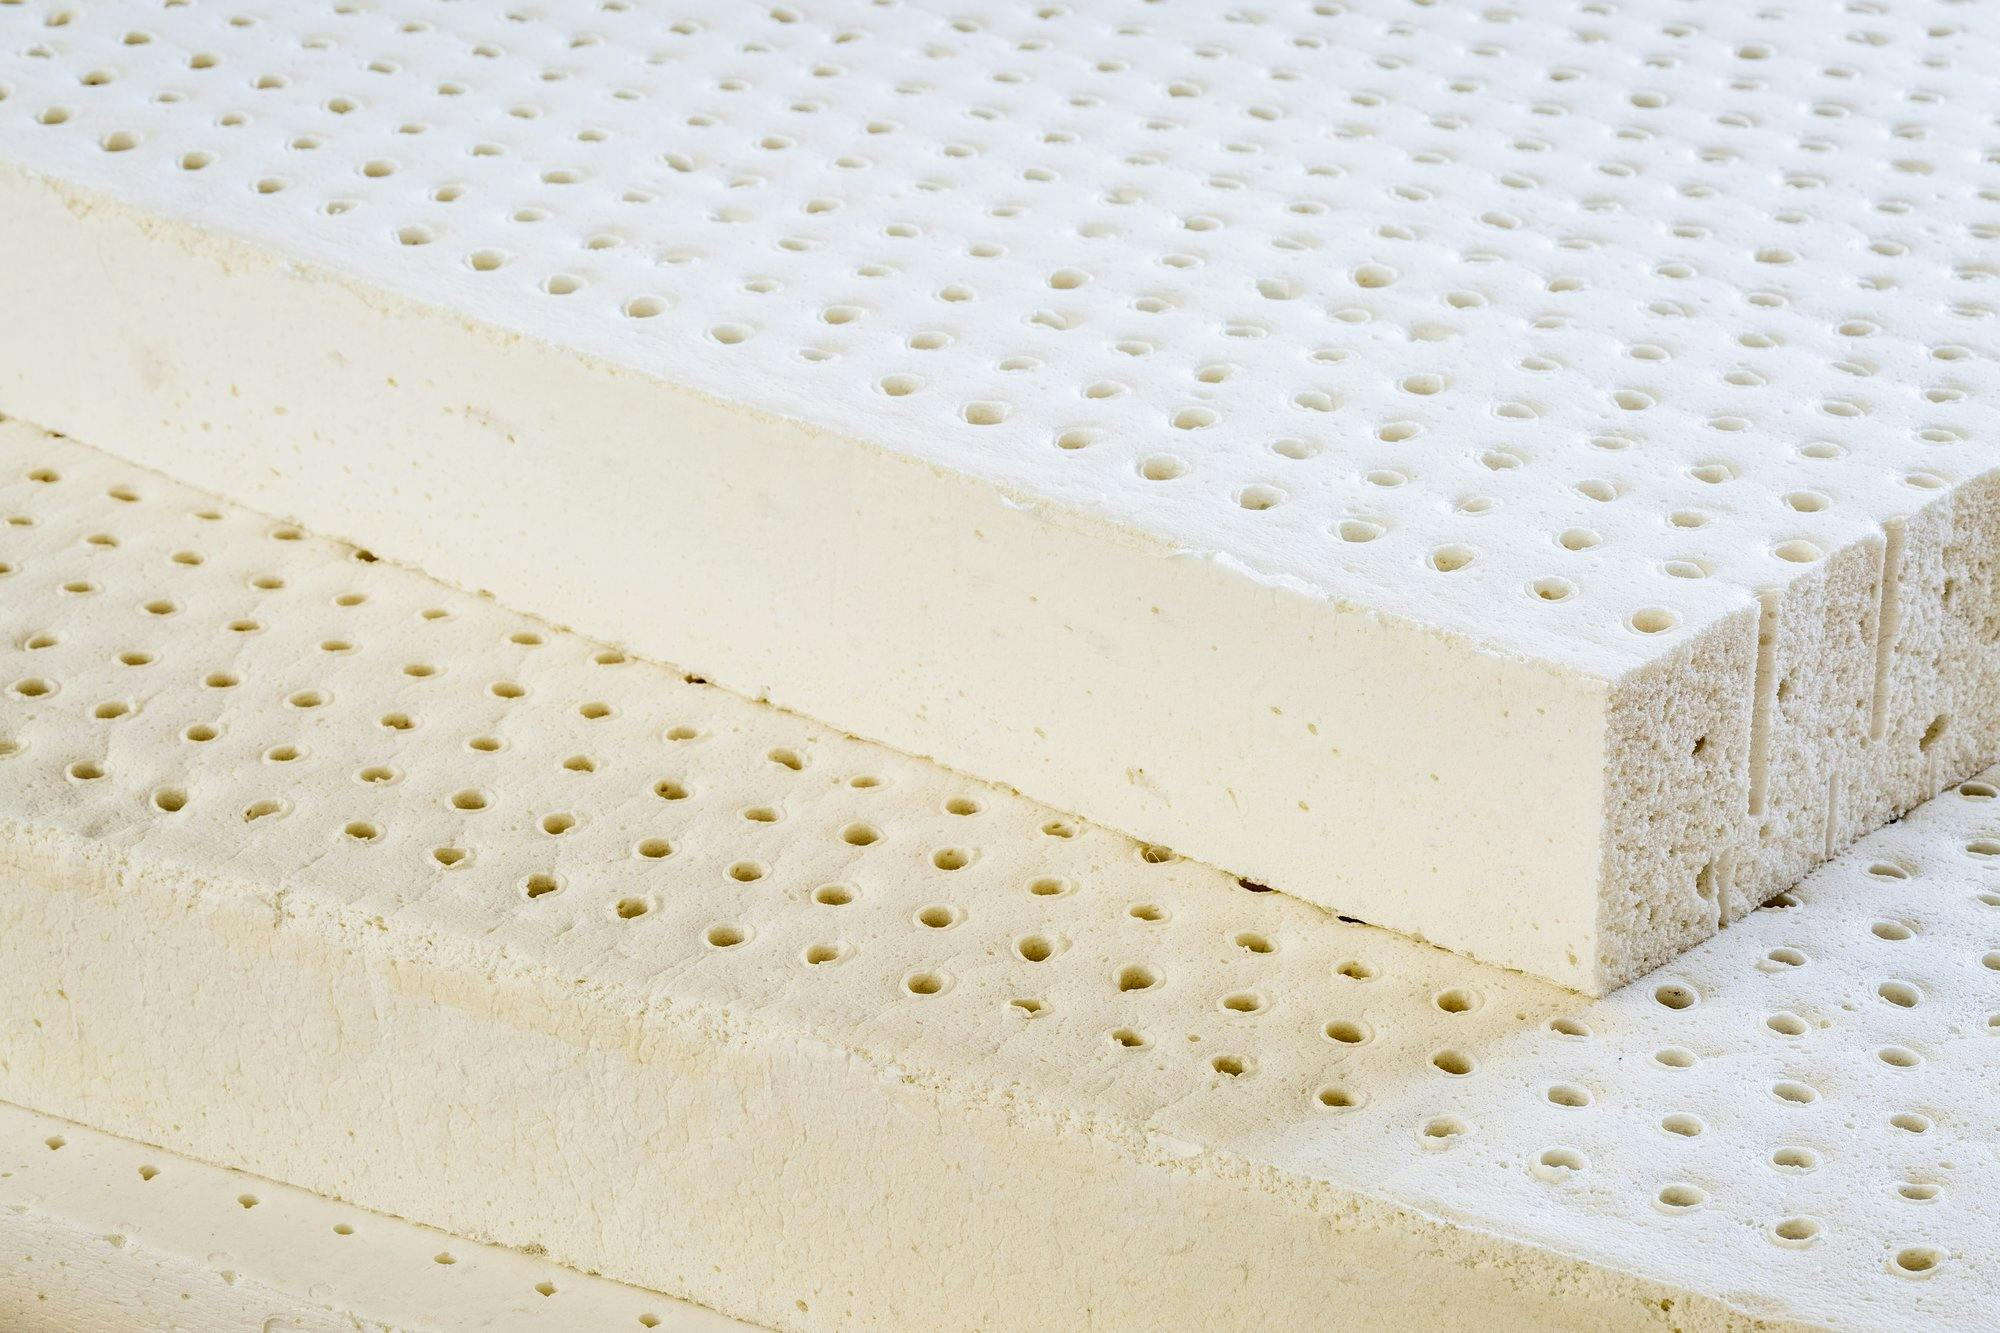 Hole-punched latex foam layers